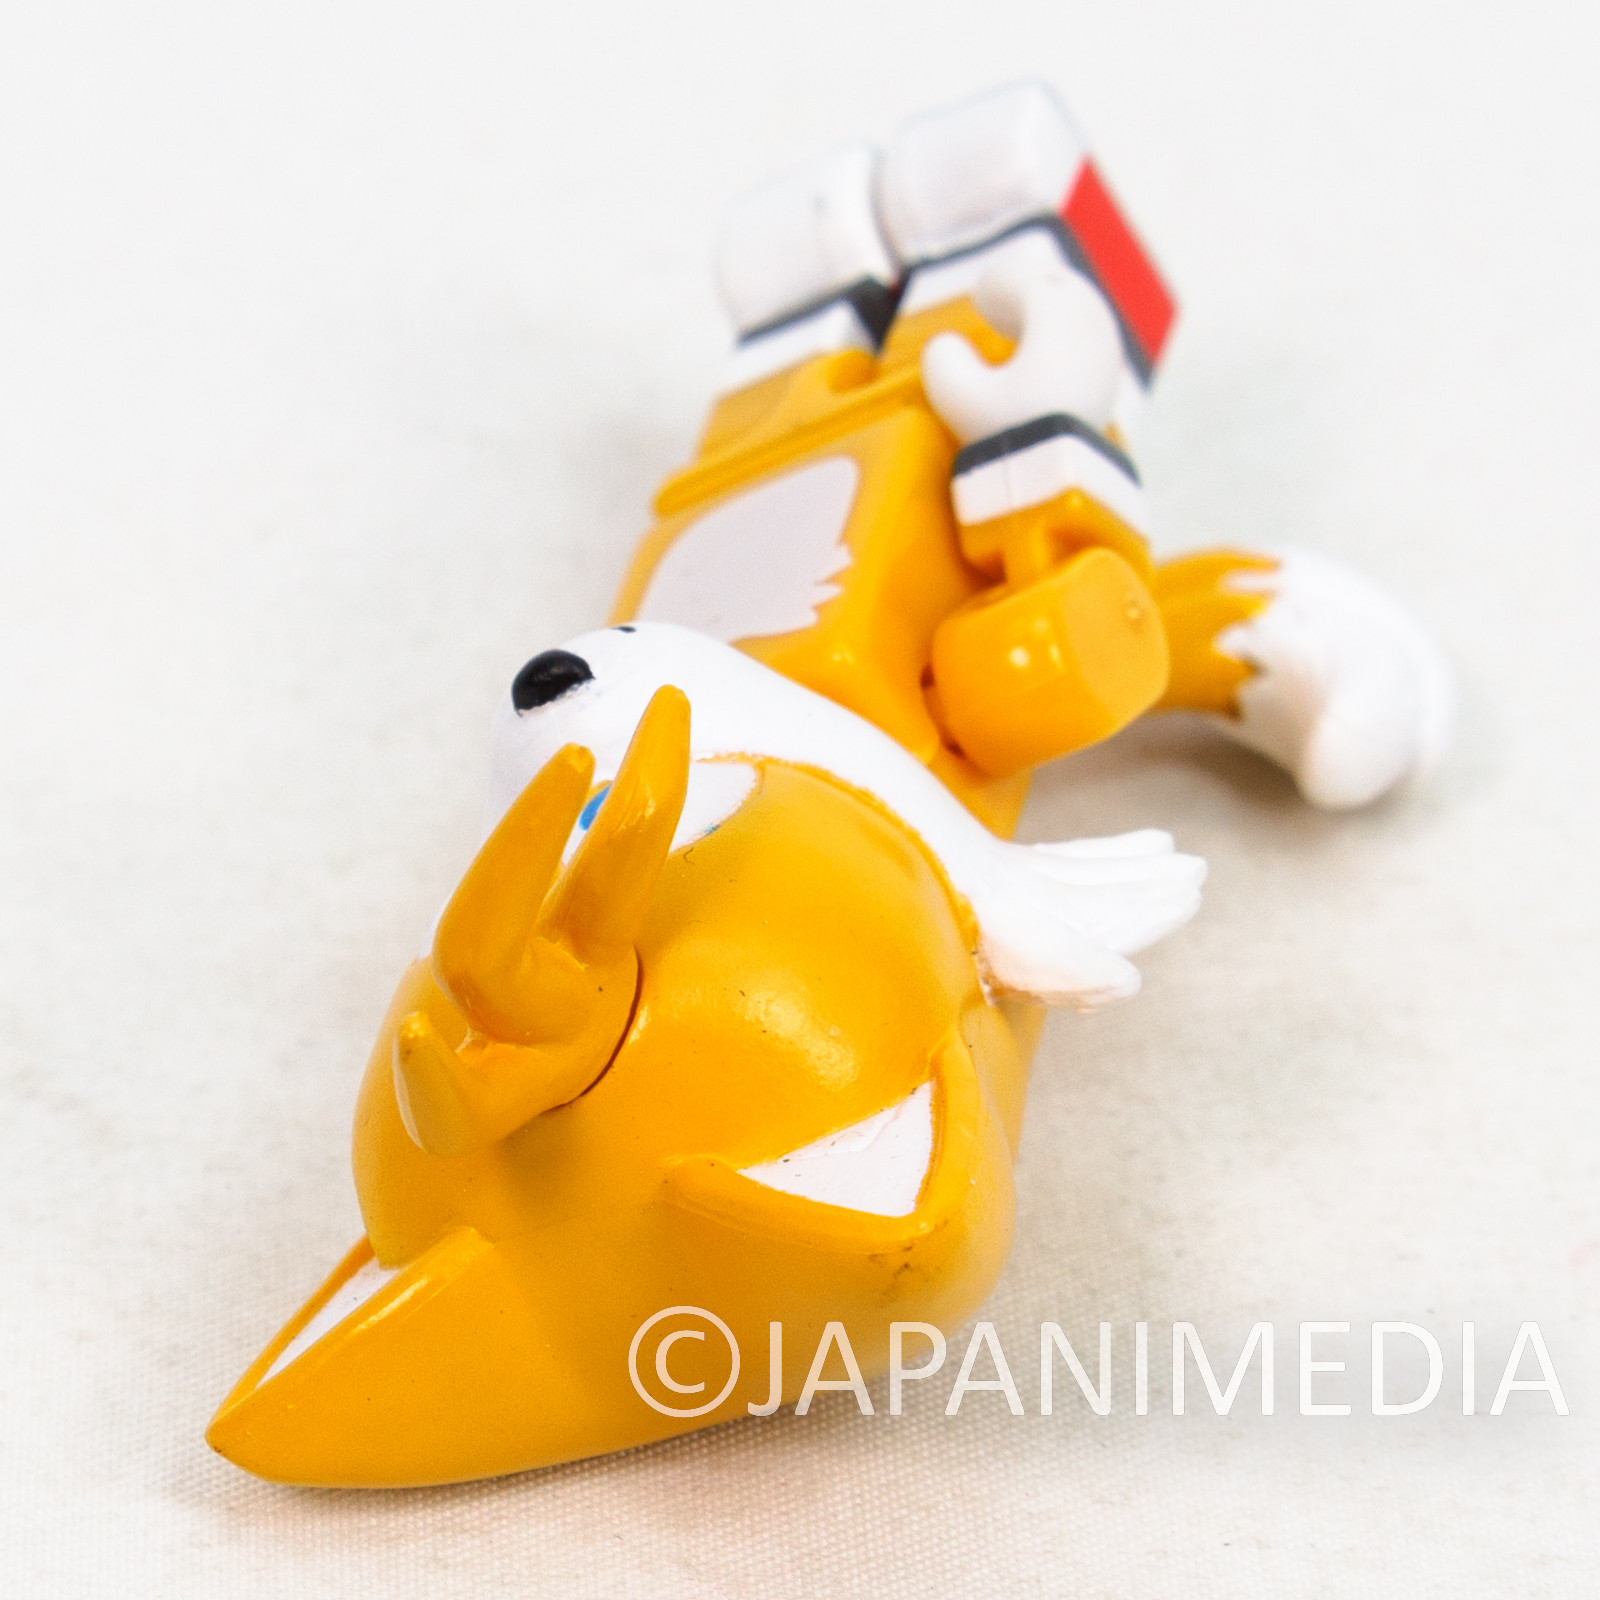 Tails getting his own collectible statue » SEGAbits - #1 Source for SEGA  News